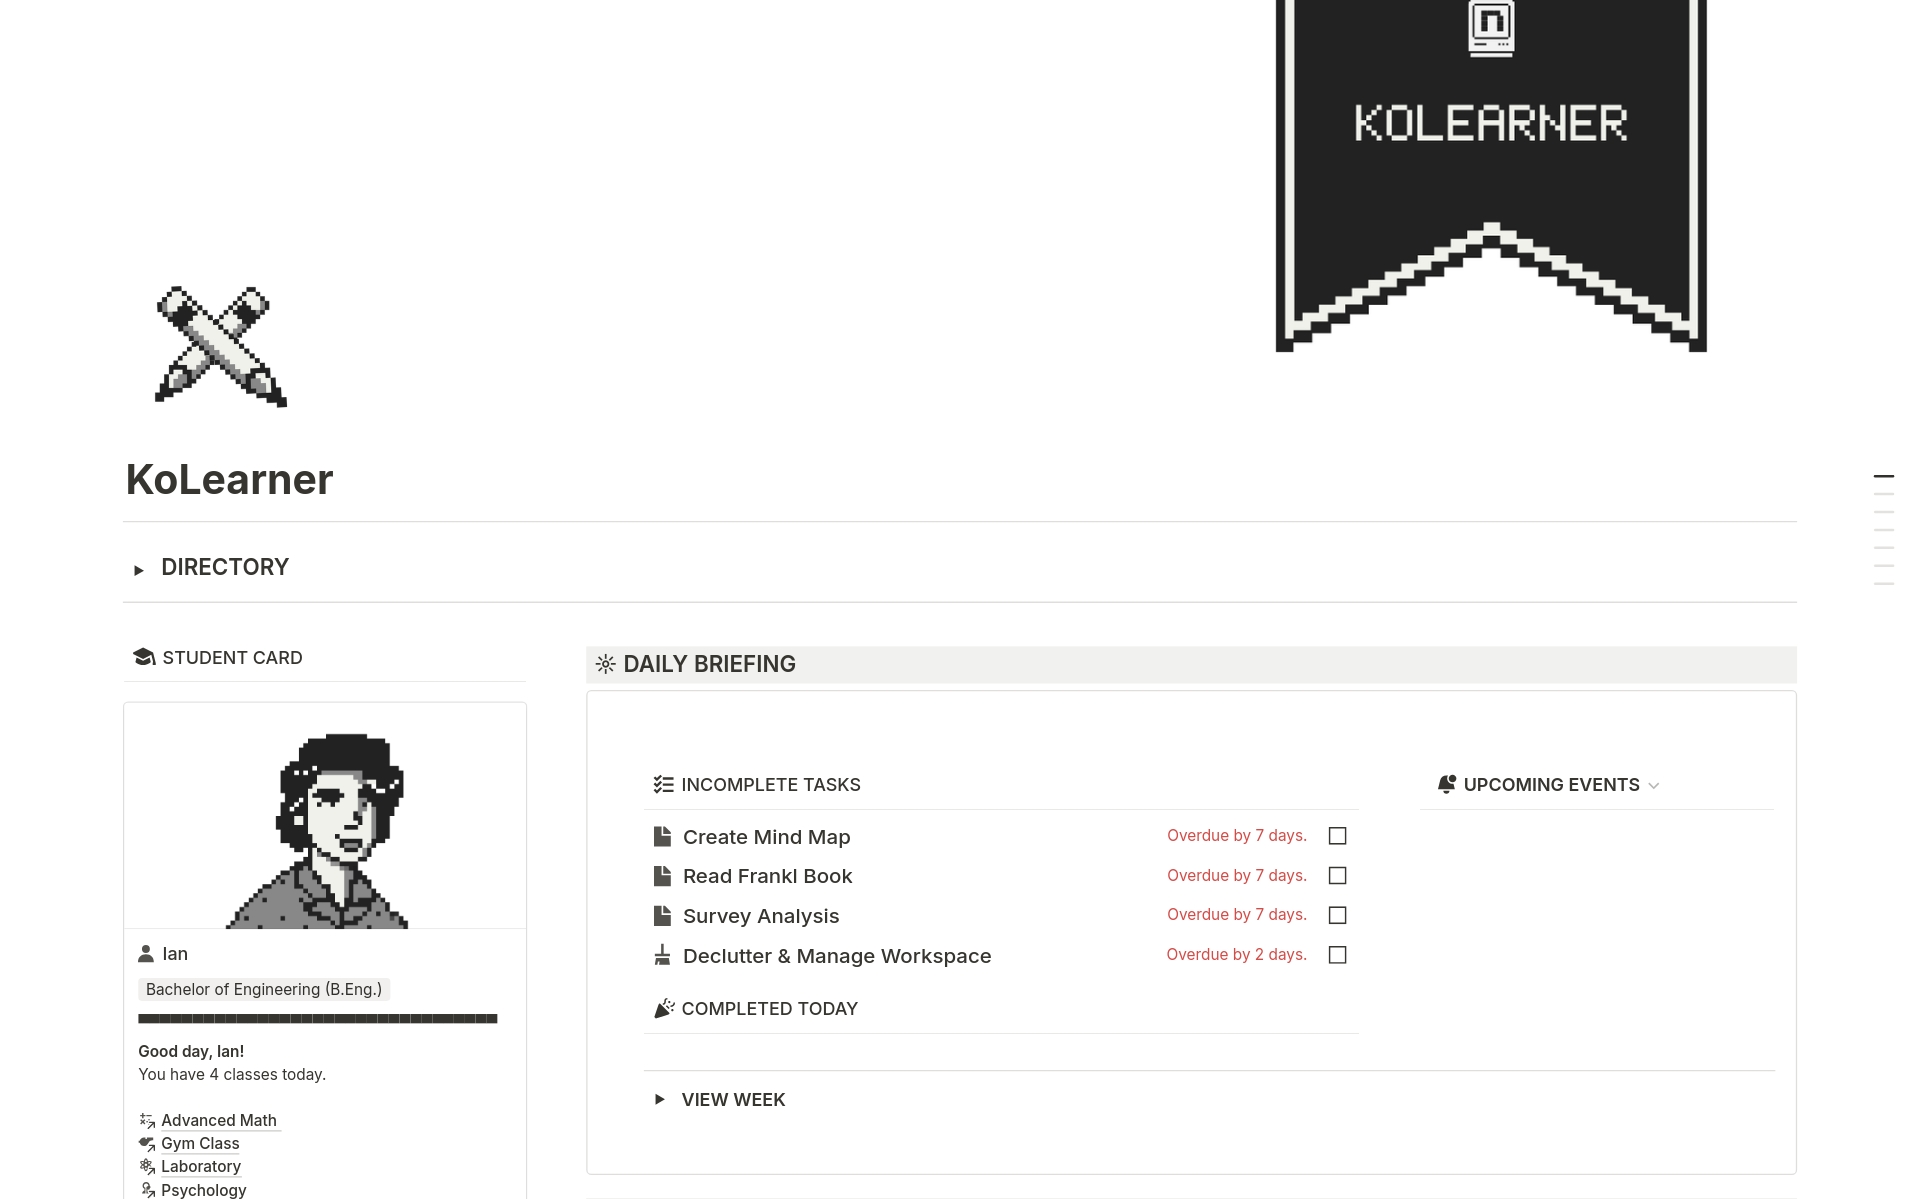 KoLearner is a thoughtfully designed system for students and learners to efficiently manage their academic life. This template provides a comprehensive structure to organize everything from yearly and semester plans to specific projects and daily tasks.